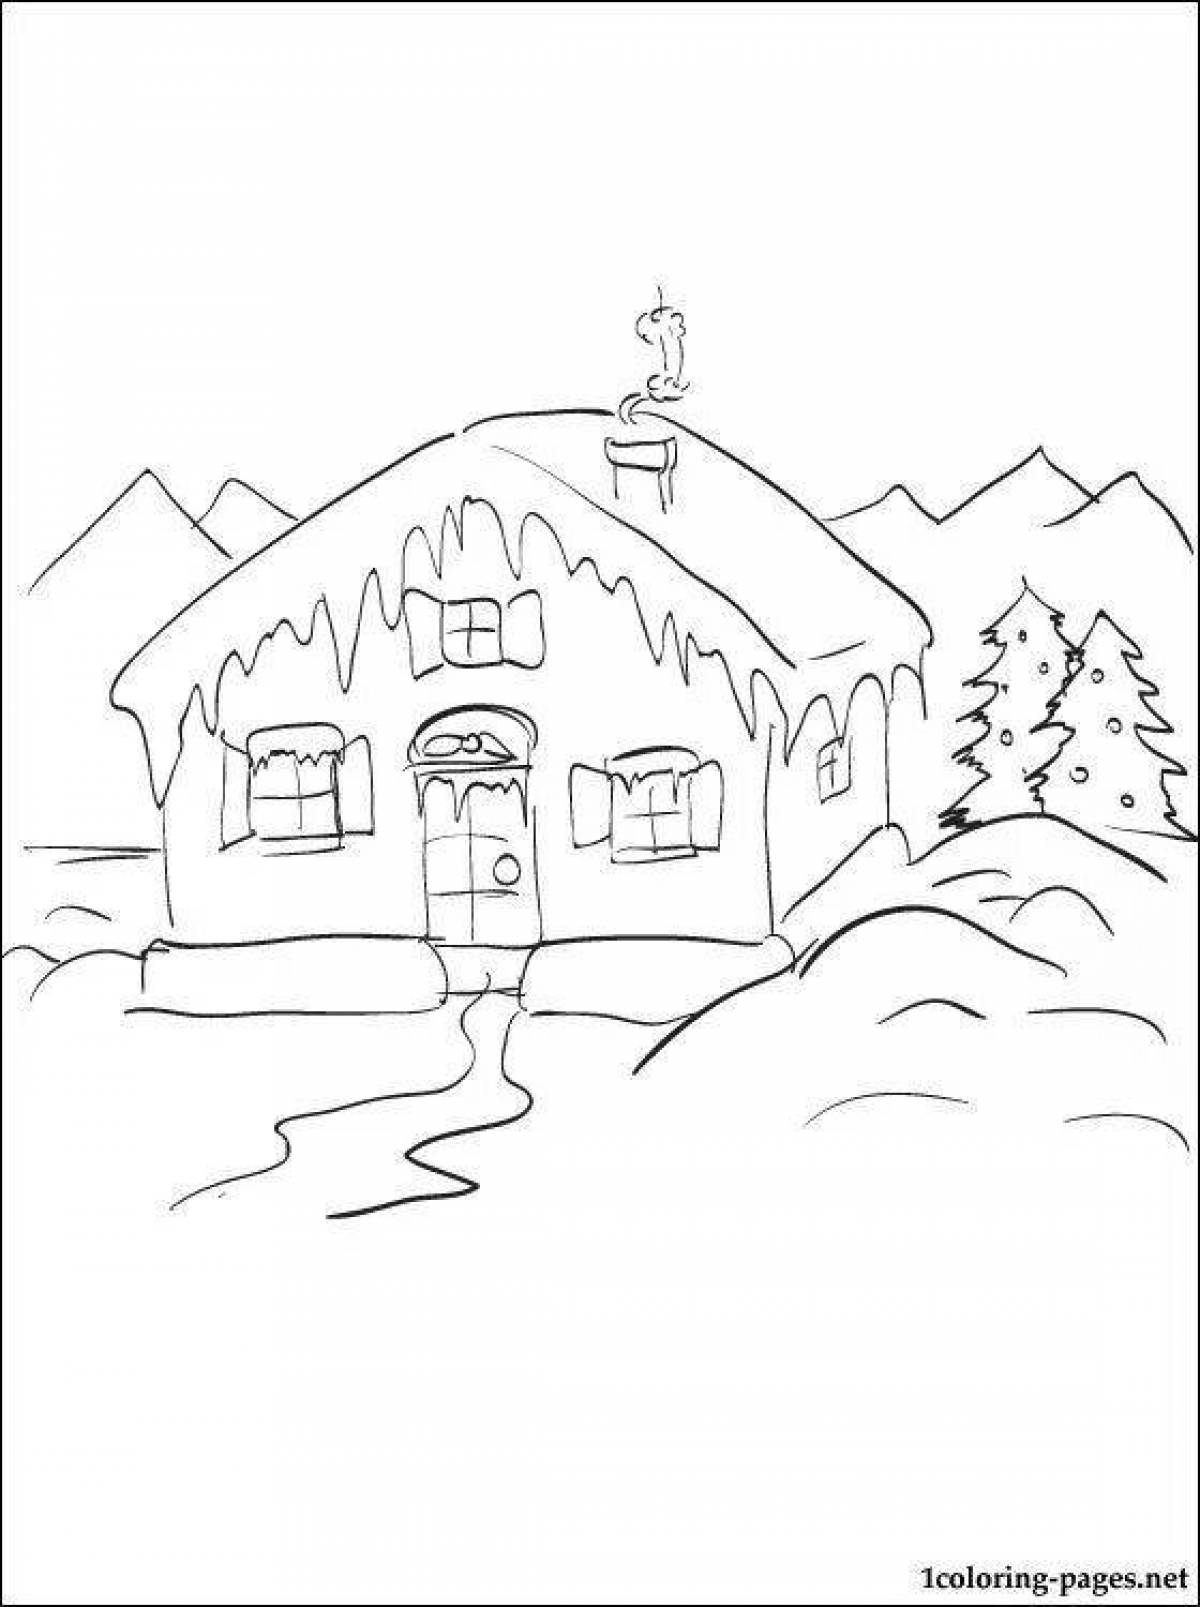 Coloring page stormy winter morning